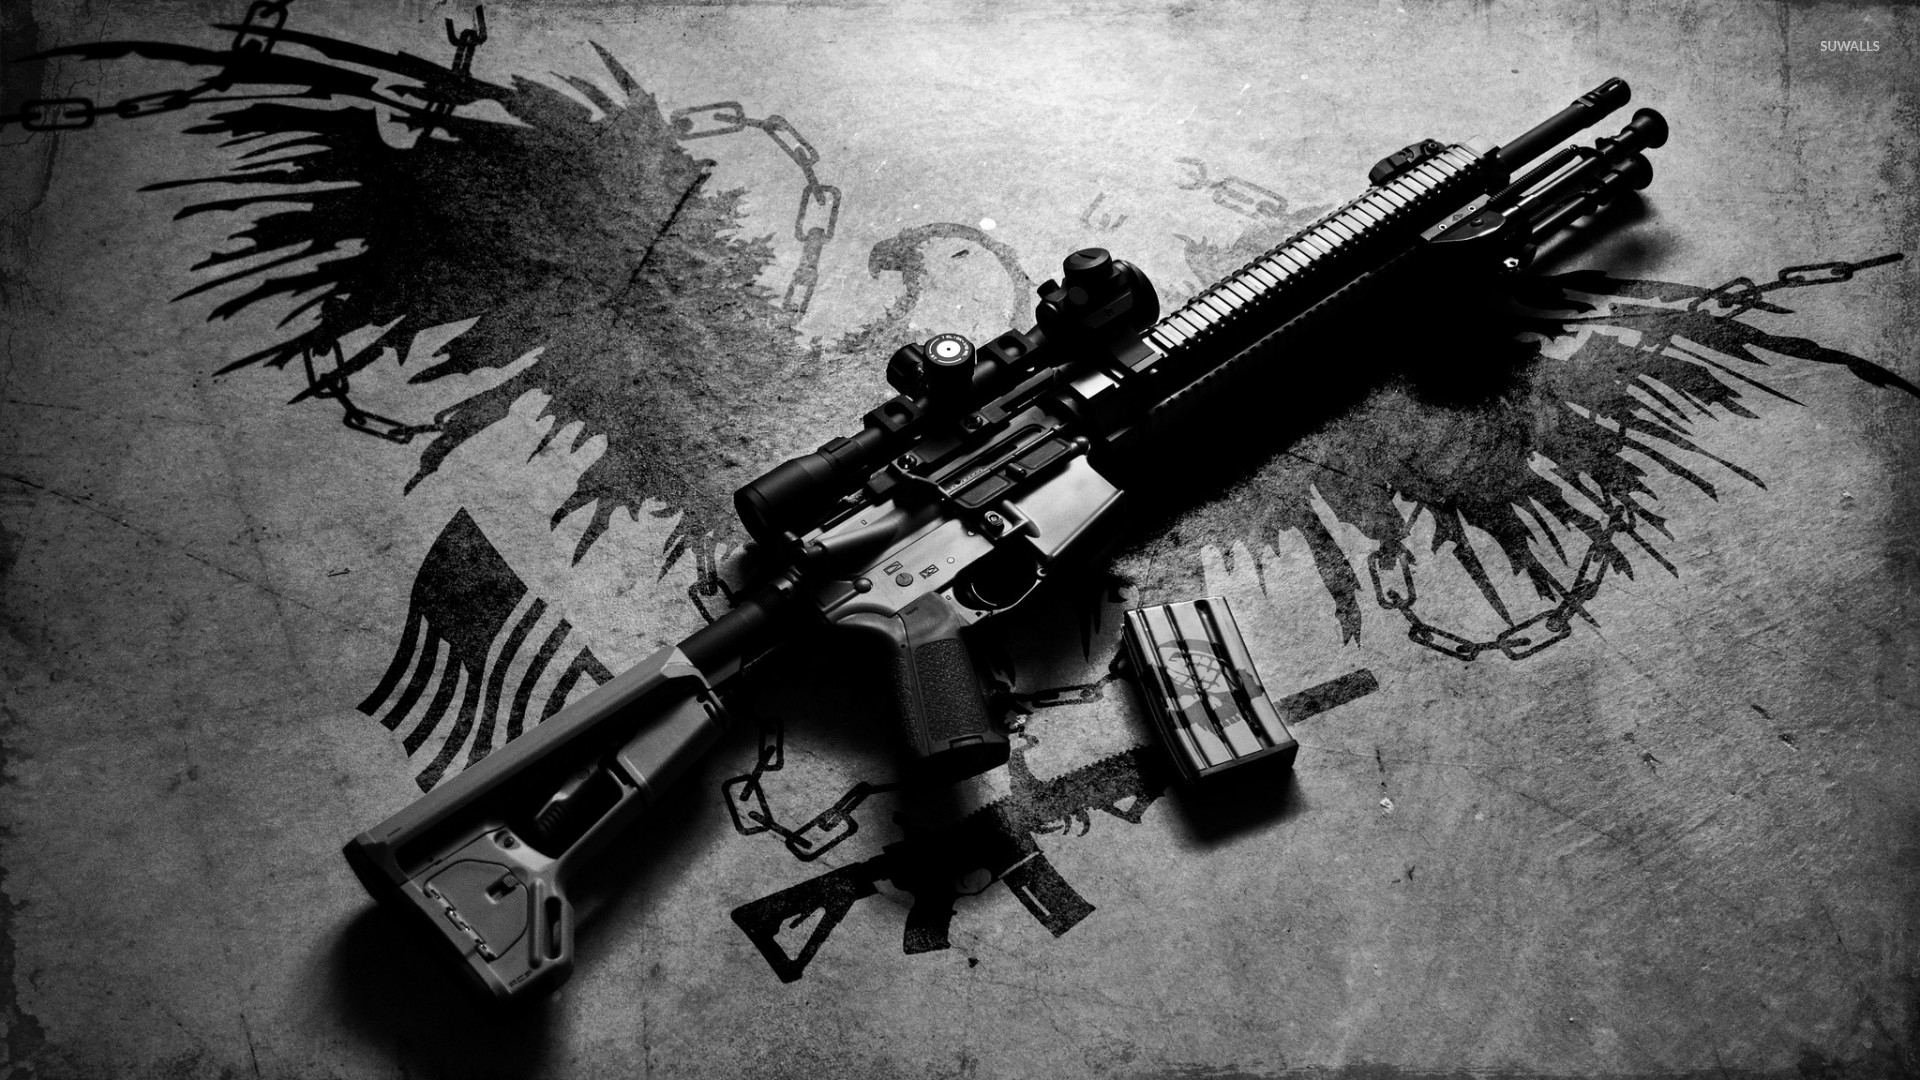 AR15 rifle on the ground wallpaper Photography wallpapers 54296